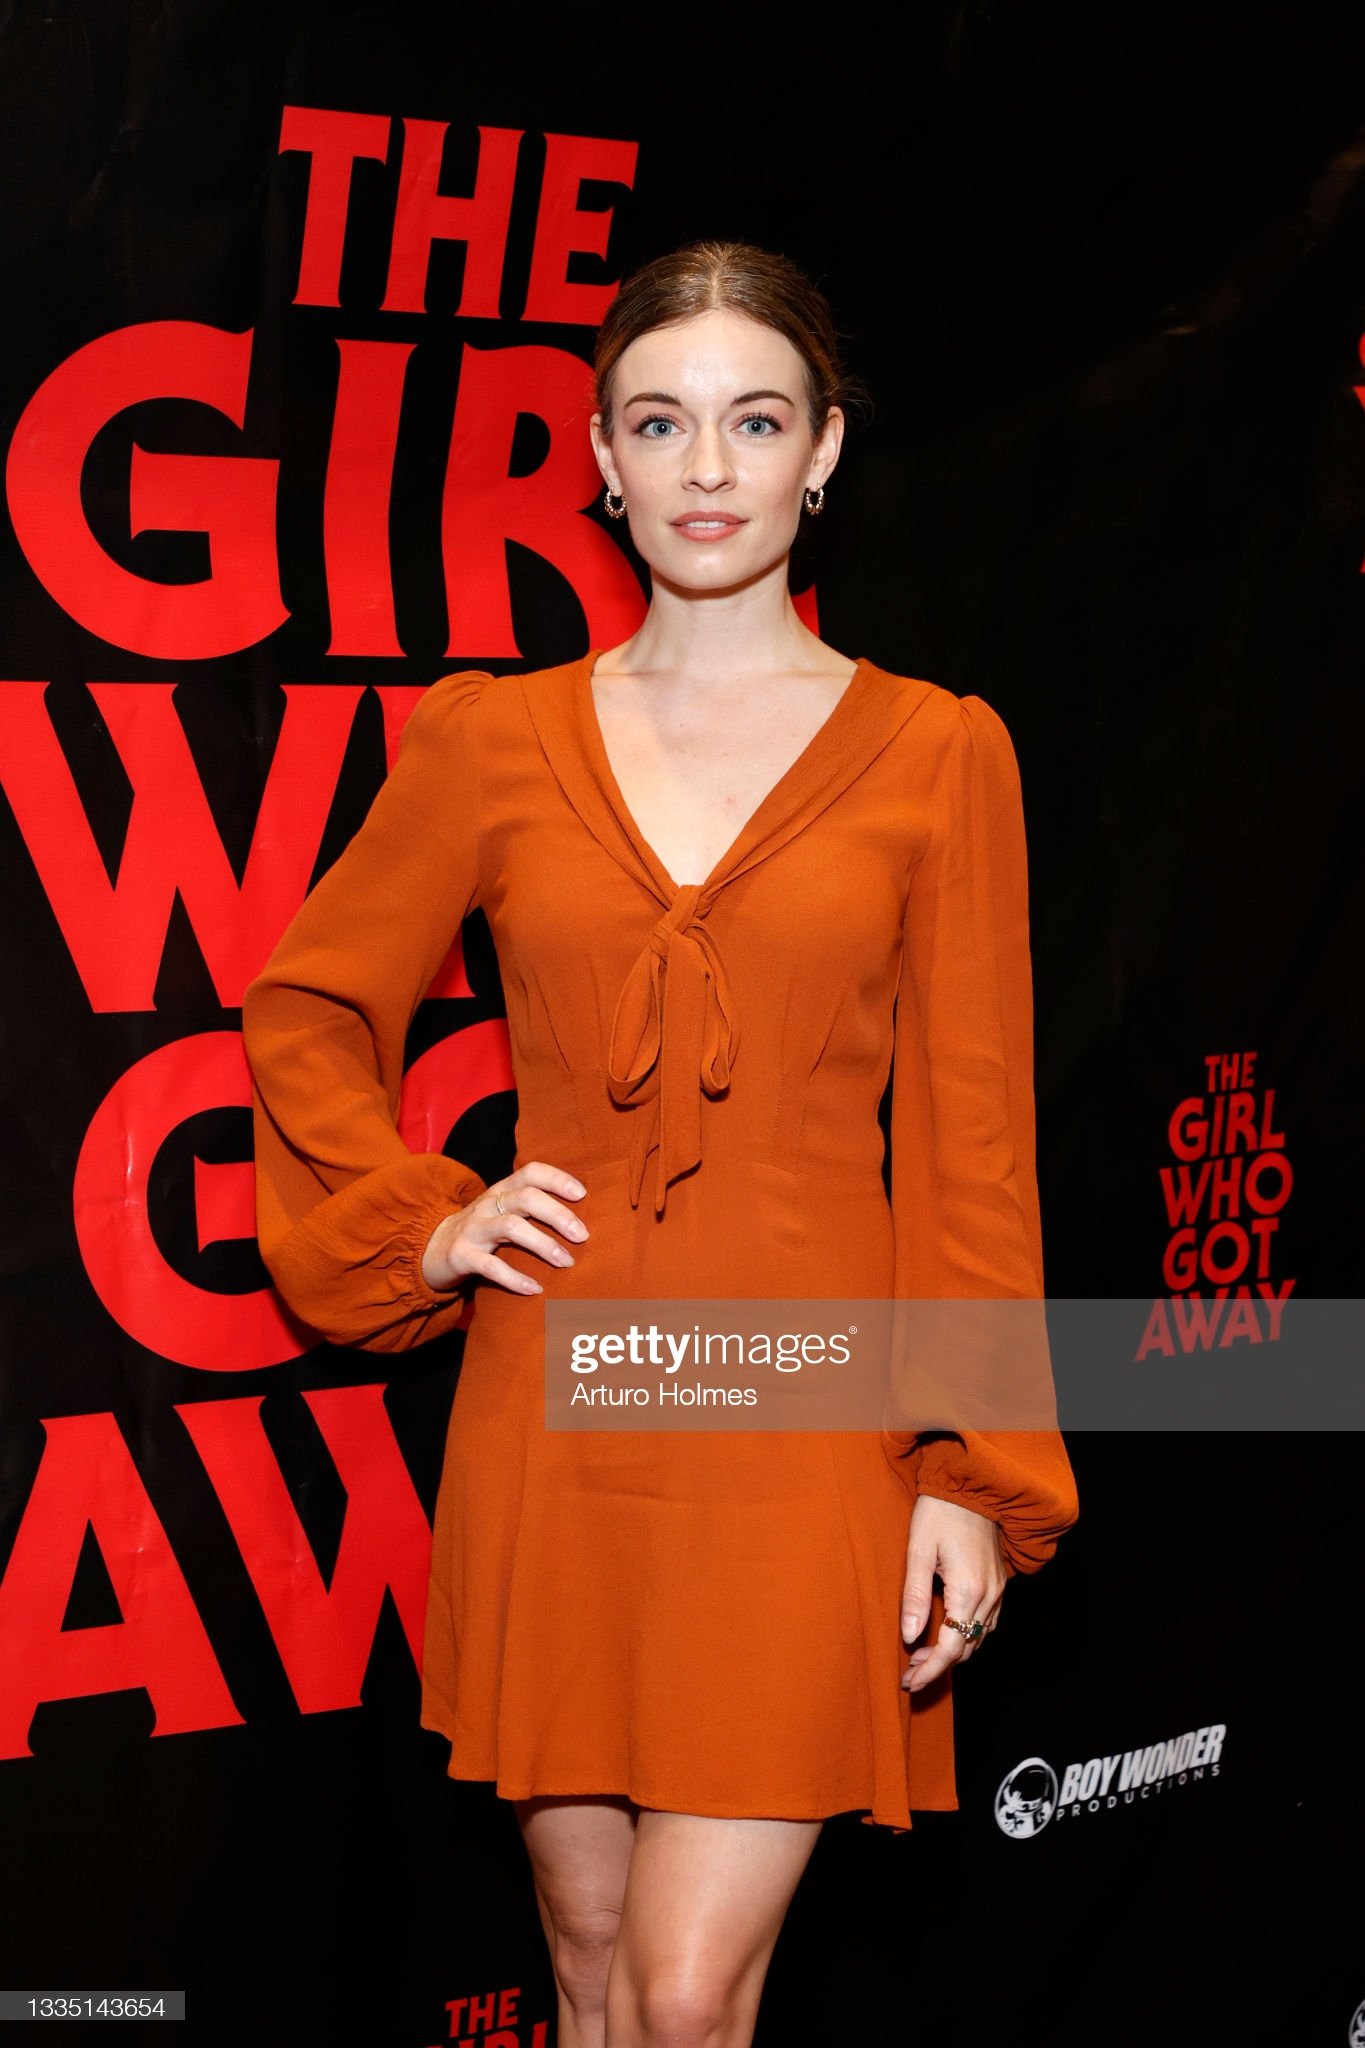 gettyimages-1335143654-2048x2048.jpg